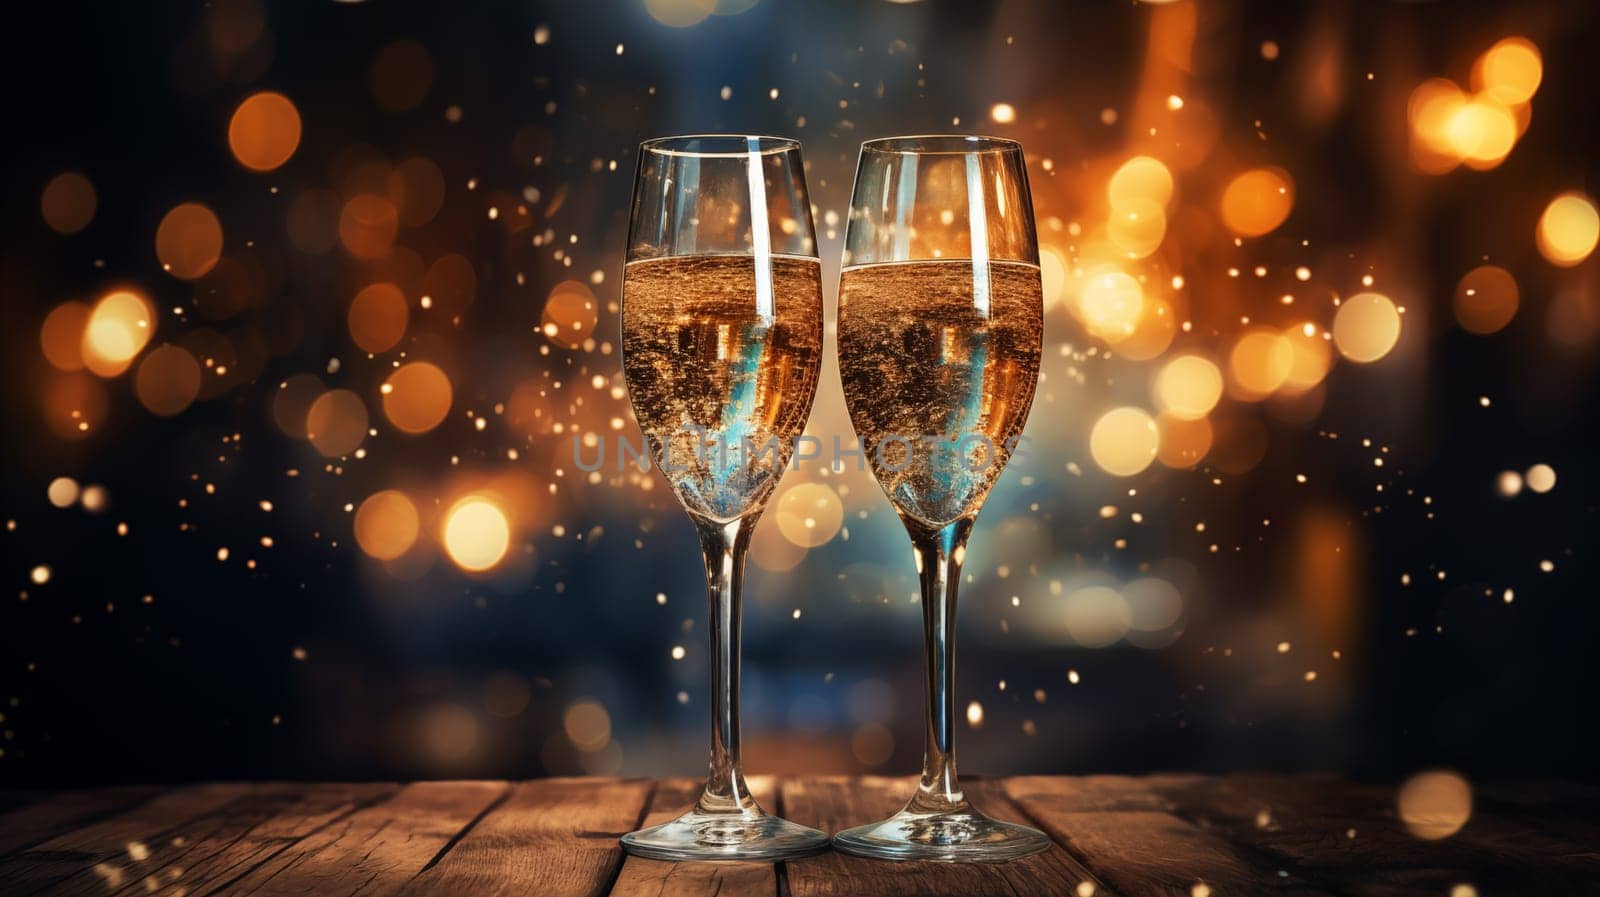 Two glasses of champagne with particles of gold stand on the wooden table in the evening, surrounded by golden bokeh lights.